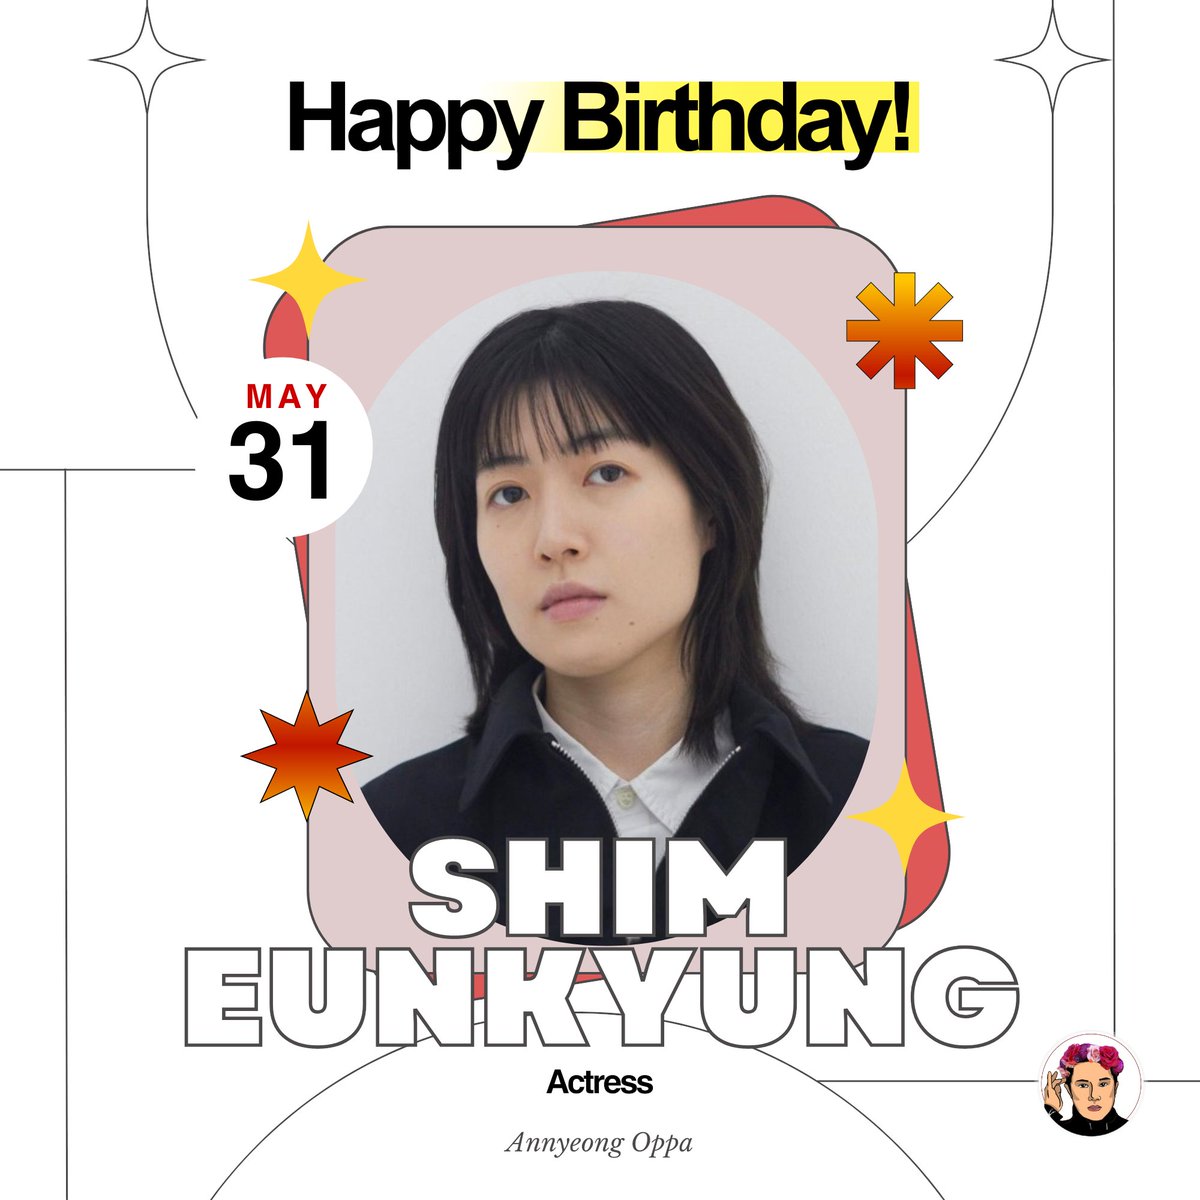 Today is Shim Eunkyung's special day! 🥳 Happiest birthday to the talented Shim Eunkyung! May your day be blessed and filled with happiness and joy! ❤️🎉 For more K-drama updates, visit: annyeongoppa.com #HappyShimEunkyungDay